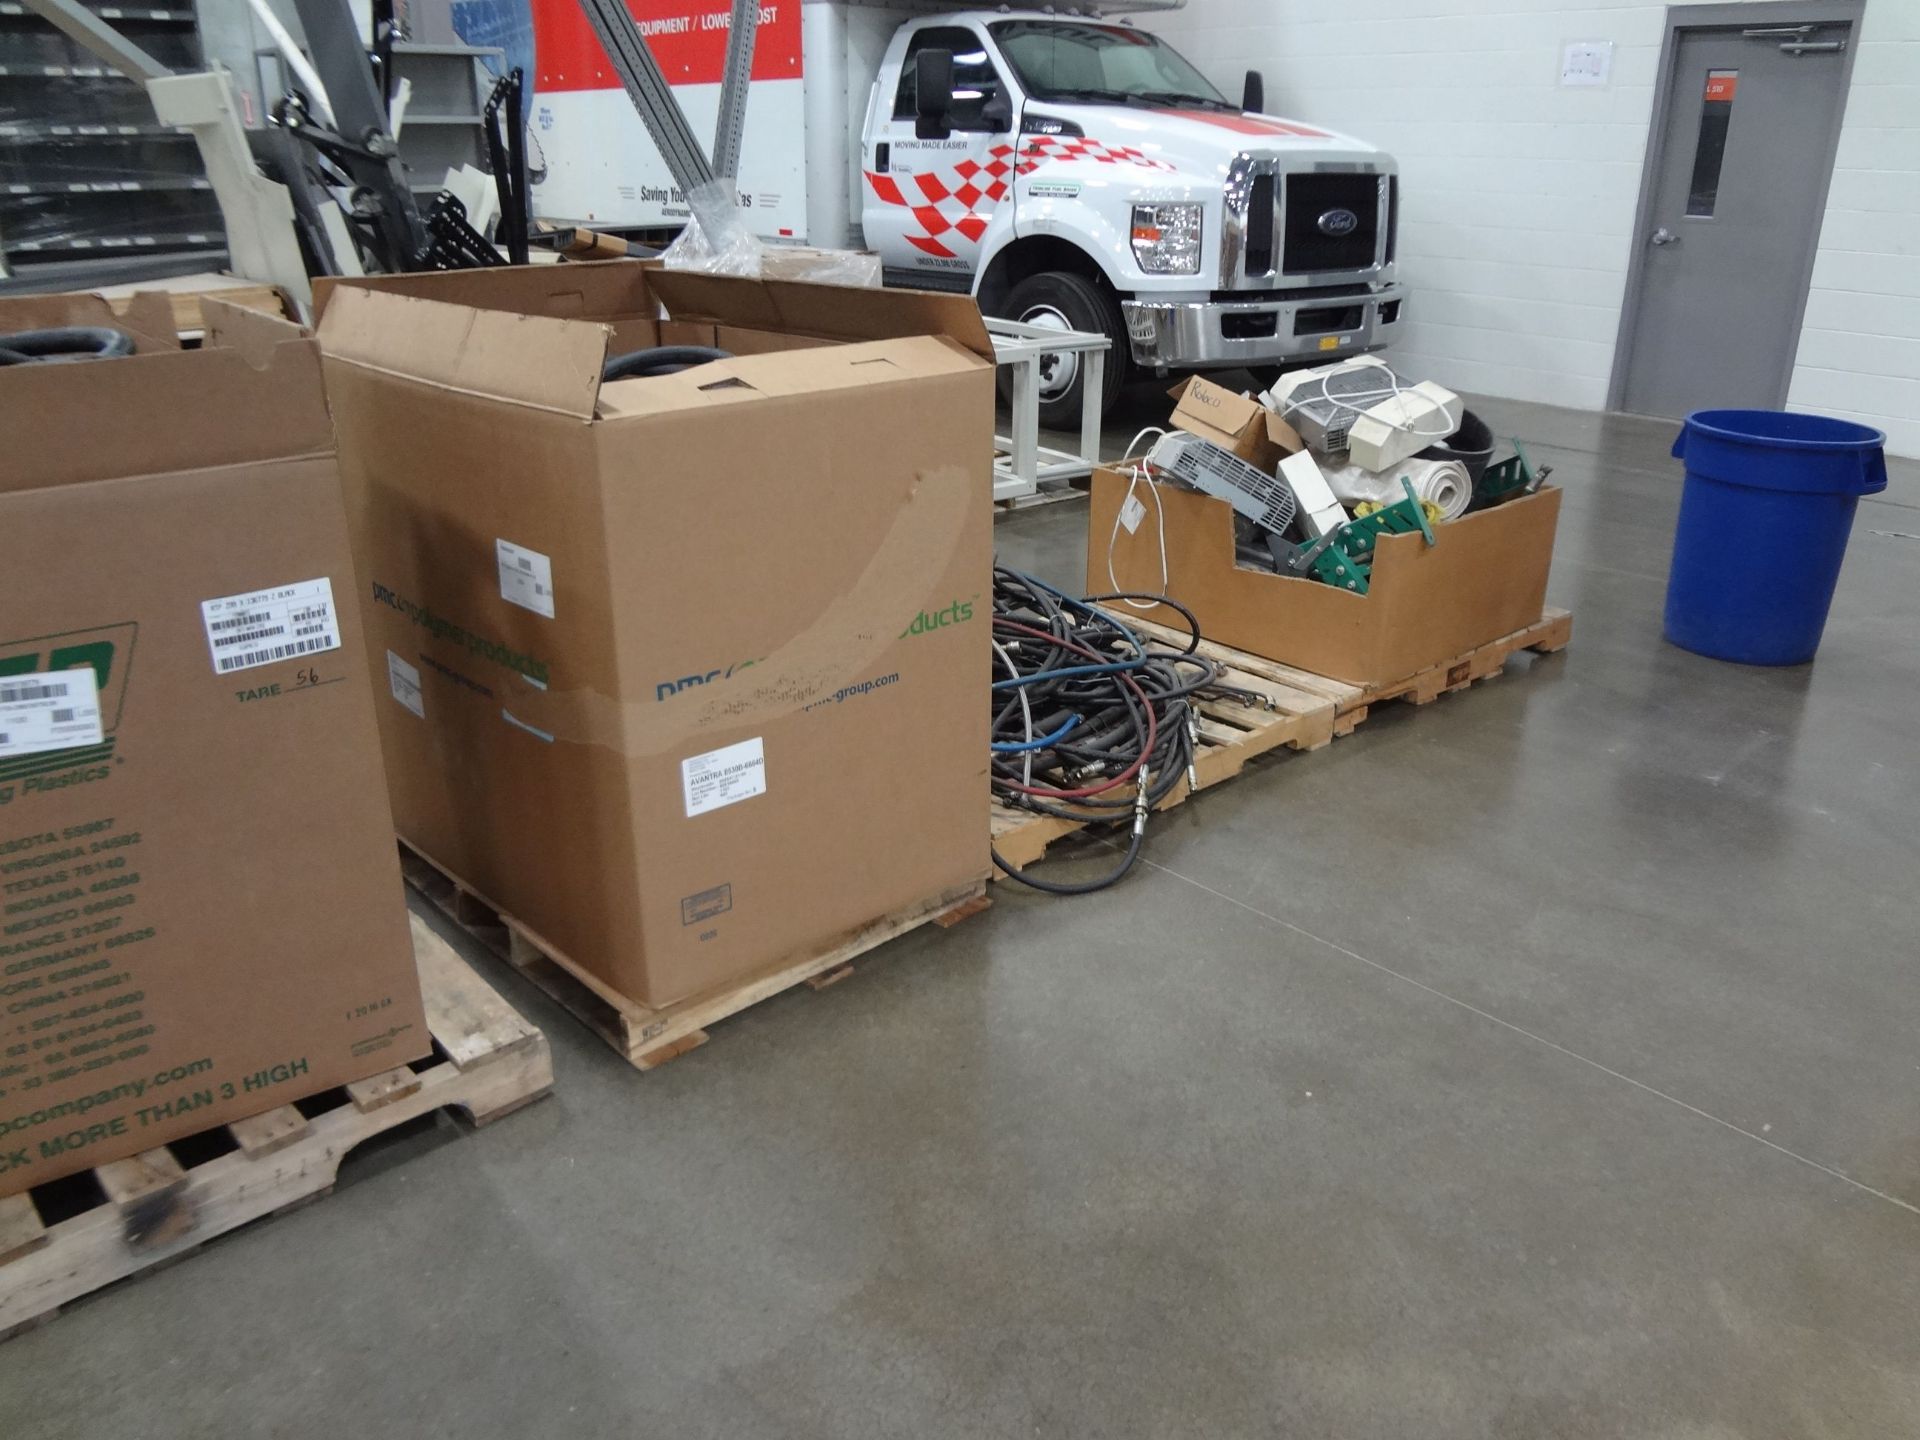 (LOT) (9) PALLETS MISCELLANEOUS EQUIPMENT INCLUDING HOSE, AV EQUIPMENT AND CONVEYOR PARTS - Image 2 of 3